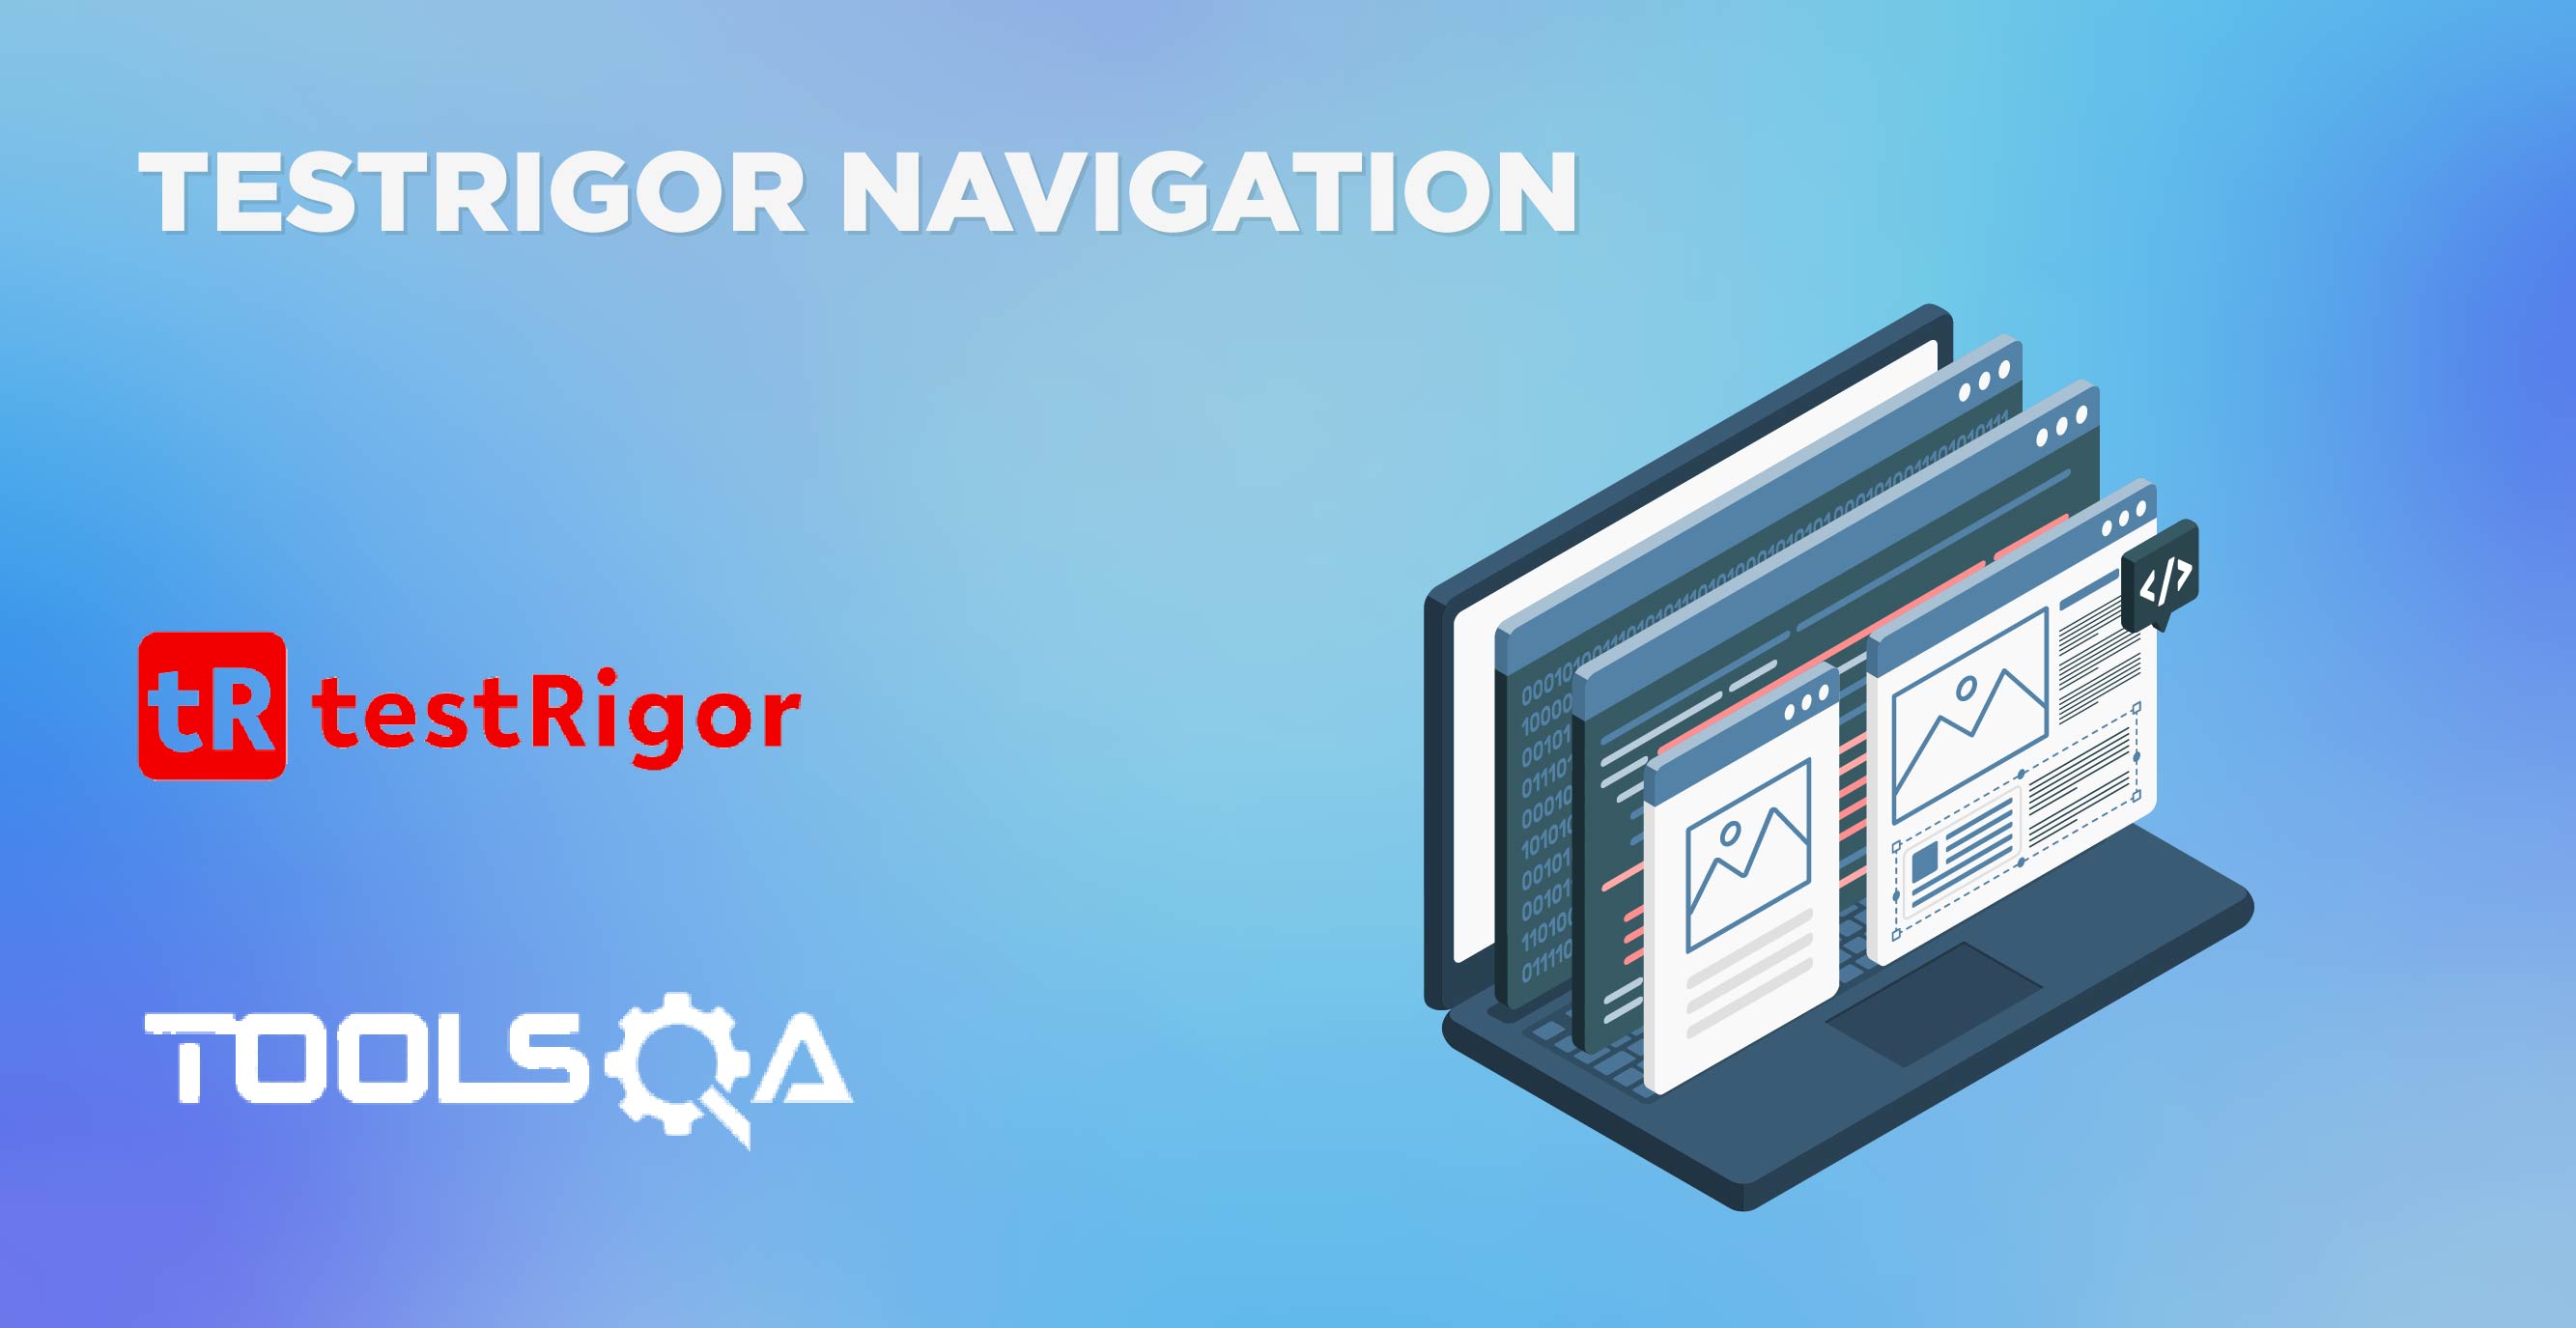 testRigor navigation - Getting familiar with settings and features